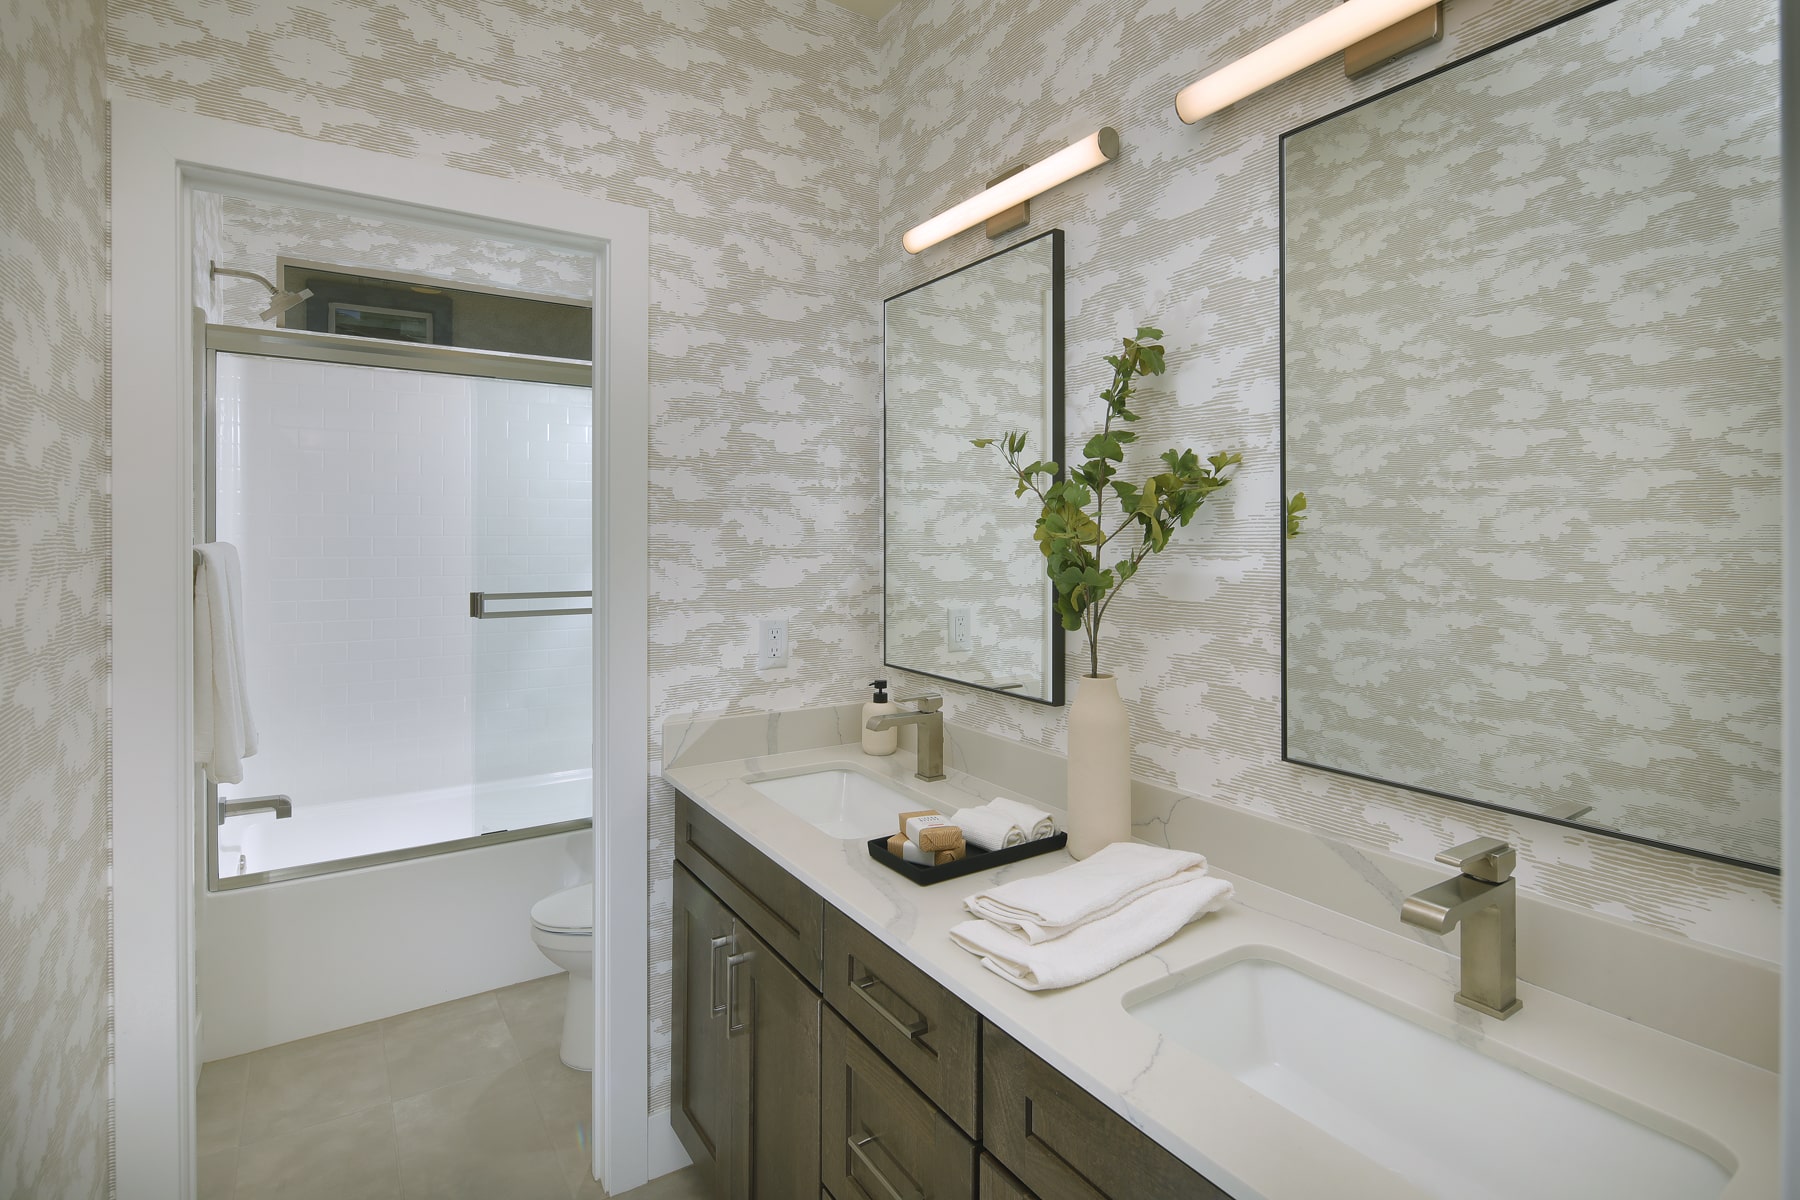 Second Bathroom of Plan 3 at Arroyos Edge by Tri Pointe Homes